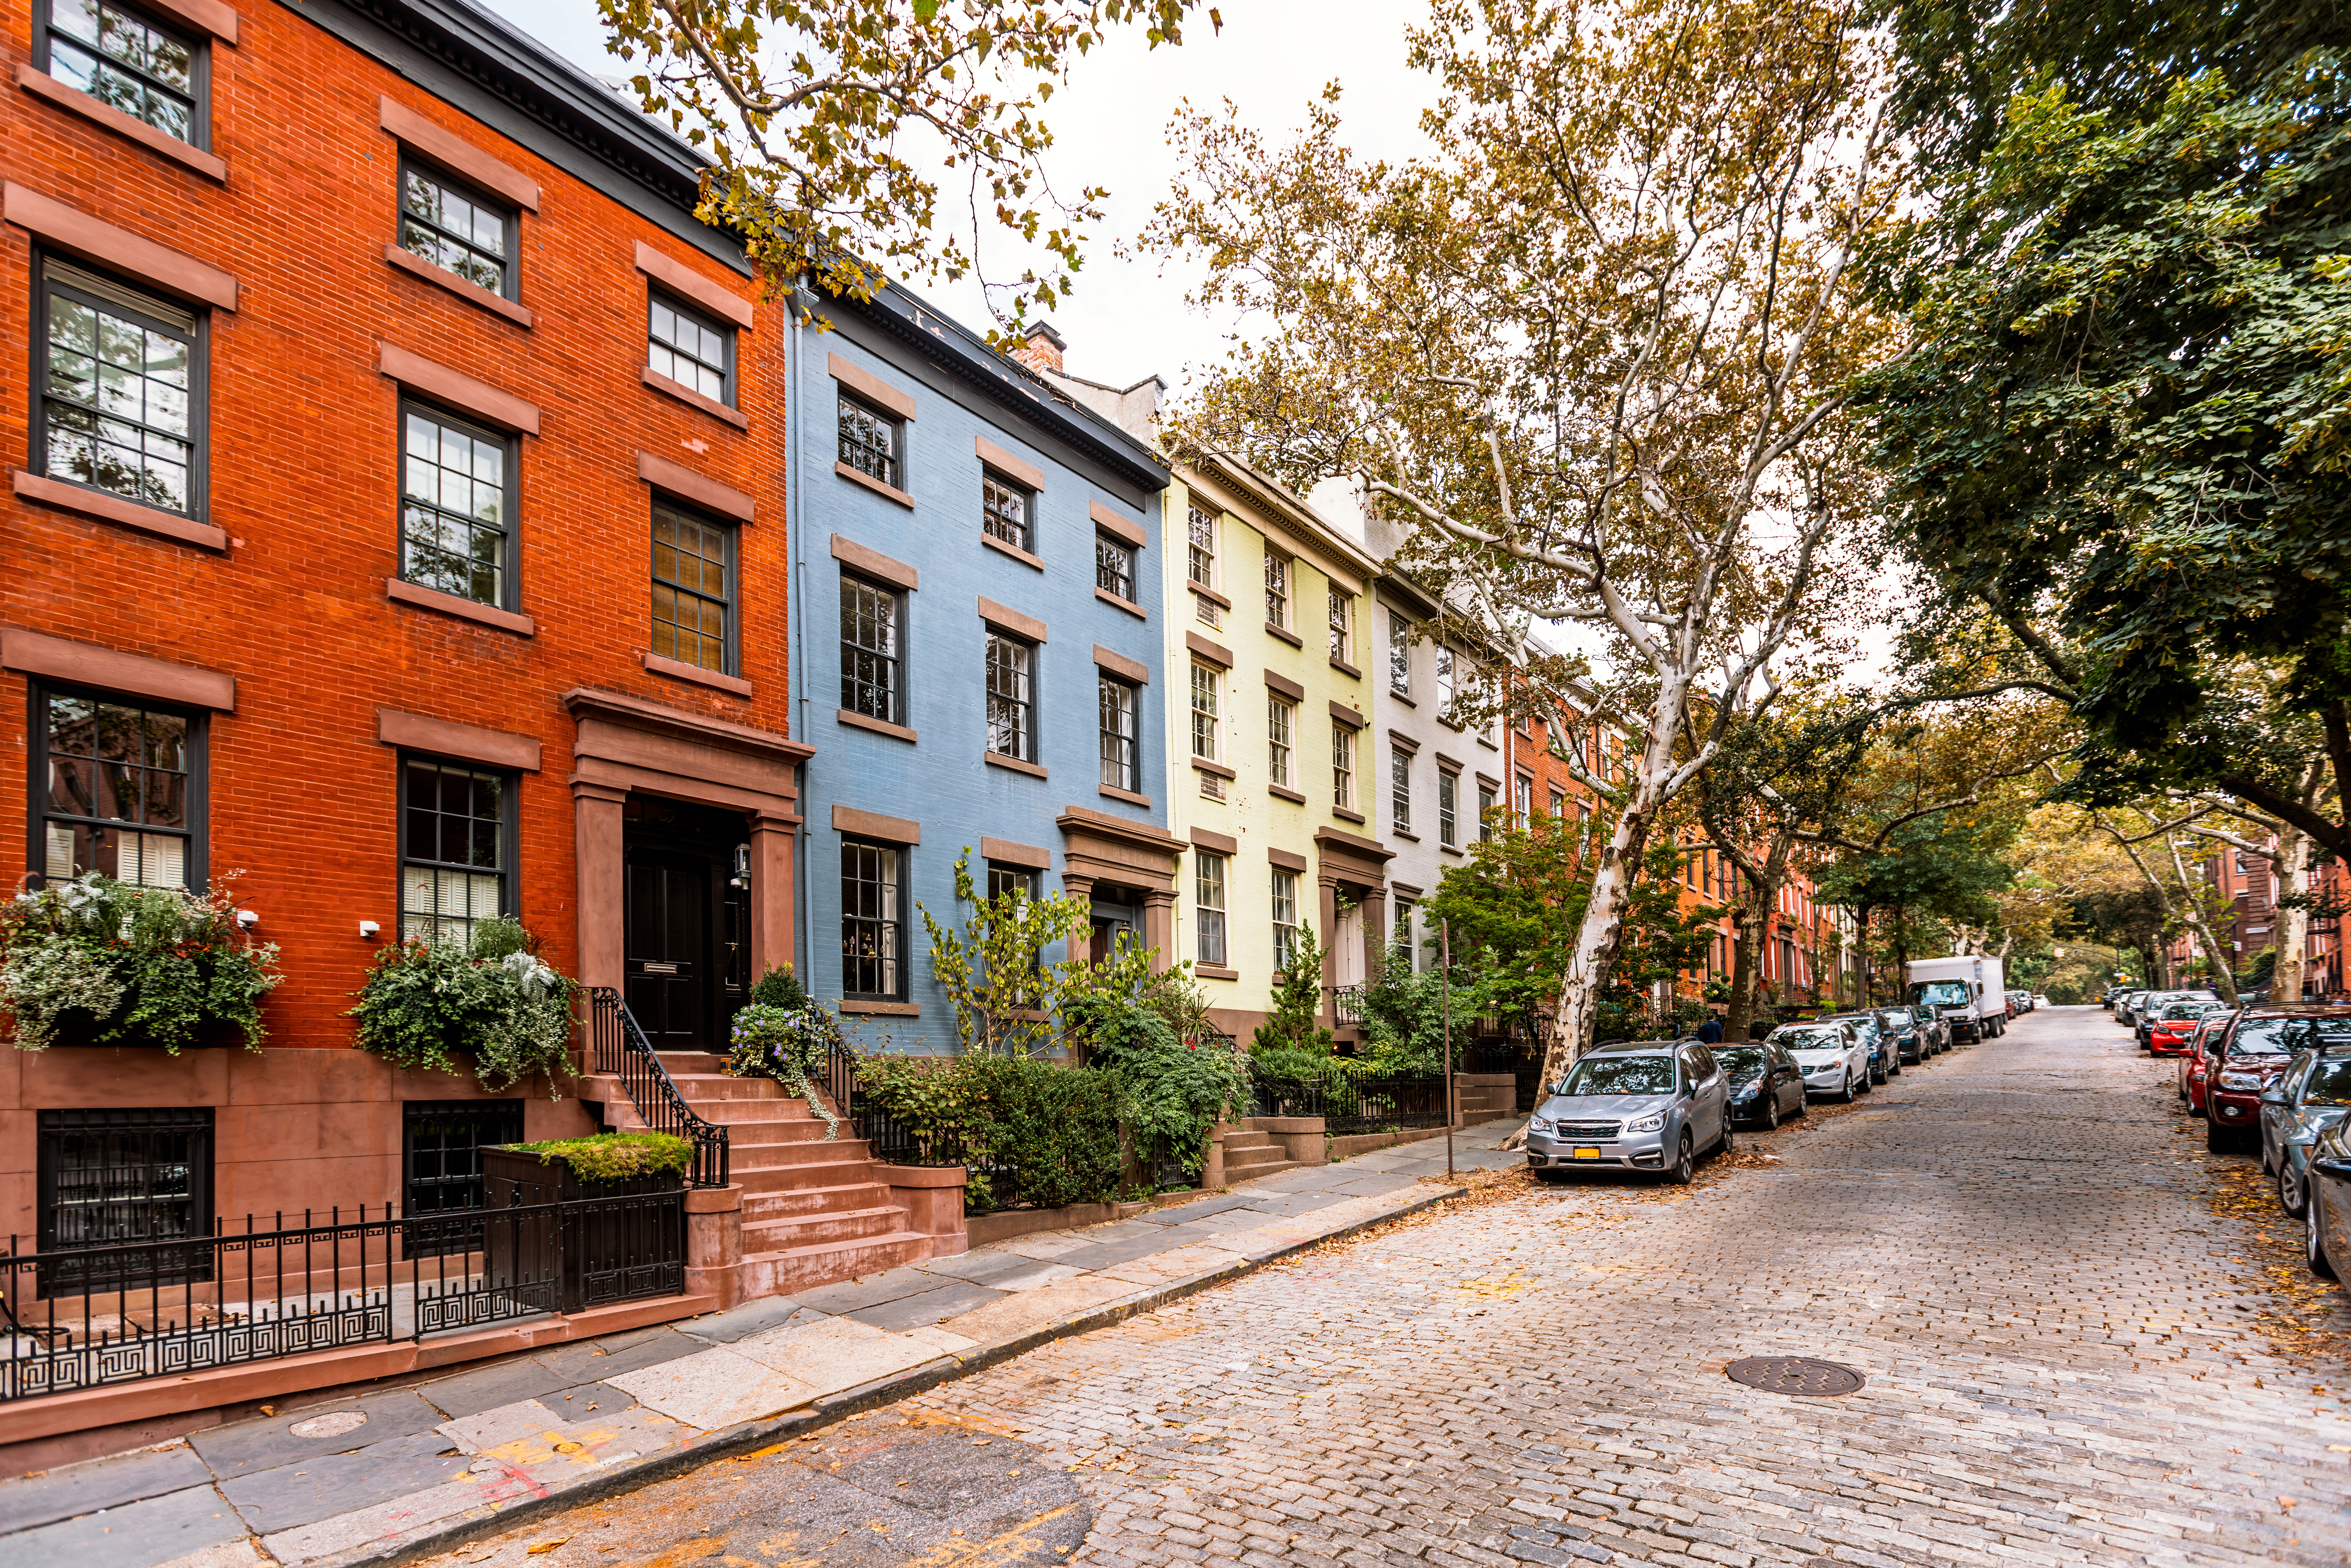 How to choose between a single-family vs. multifamily home